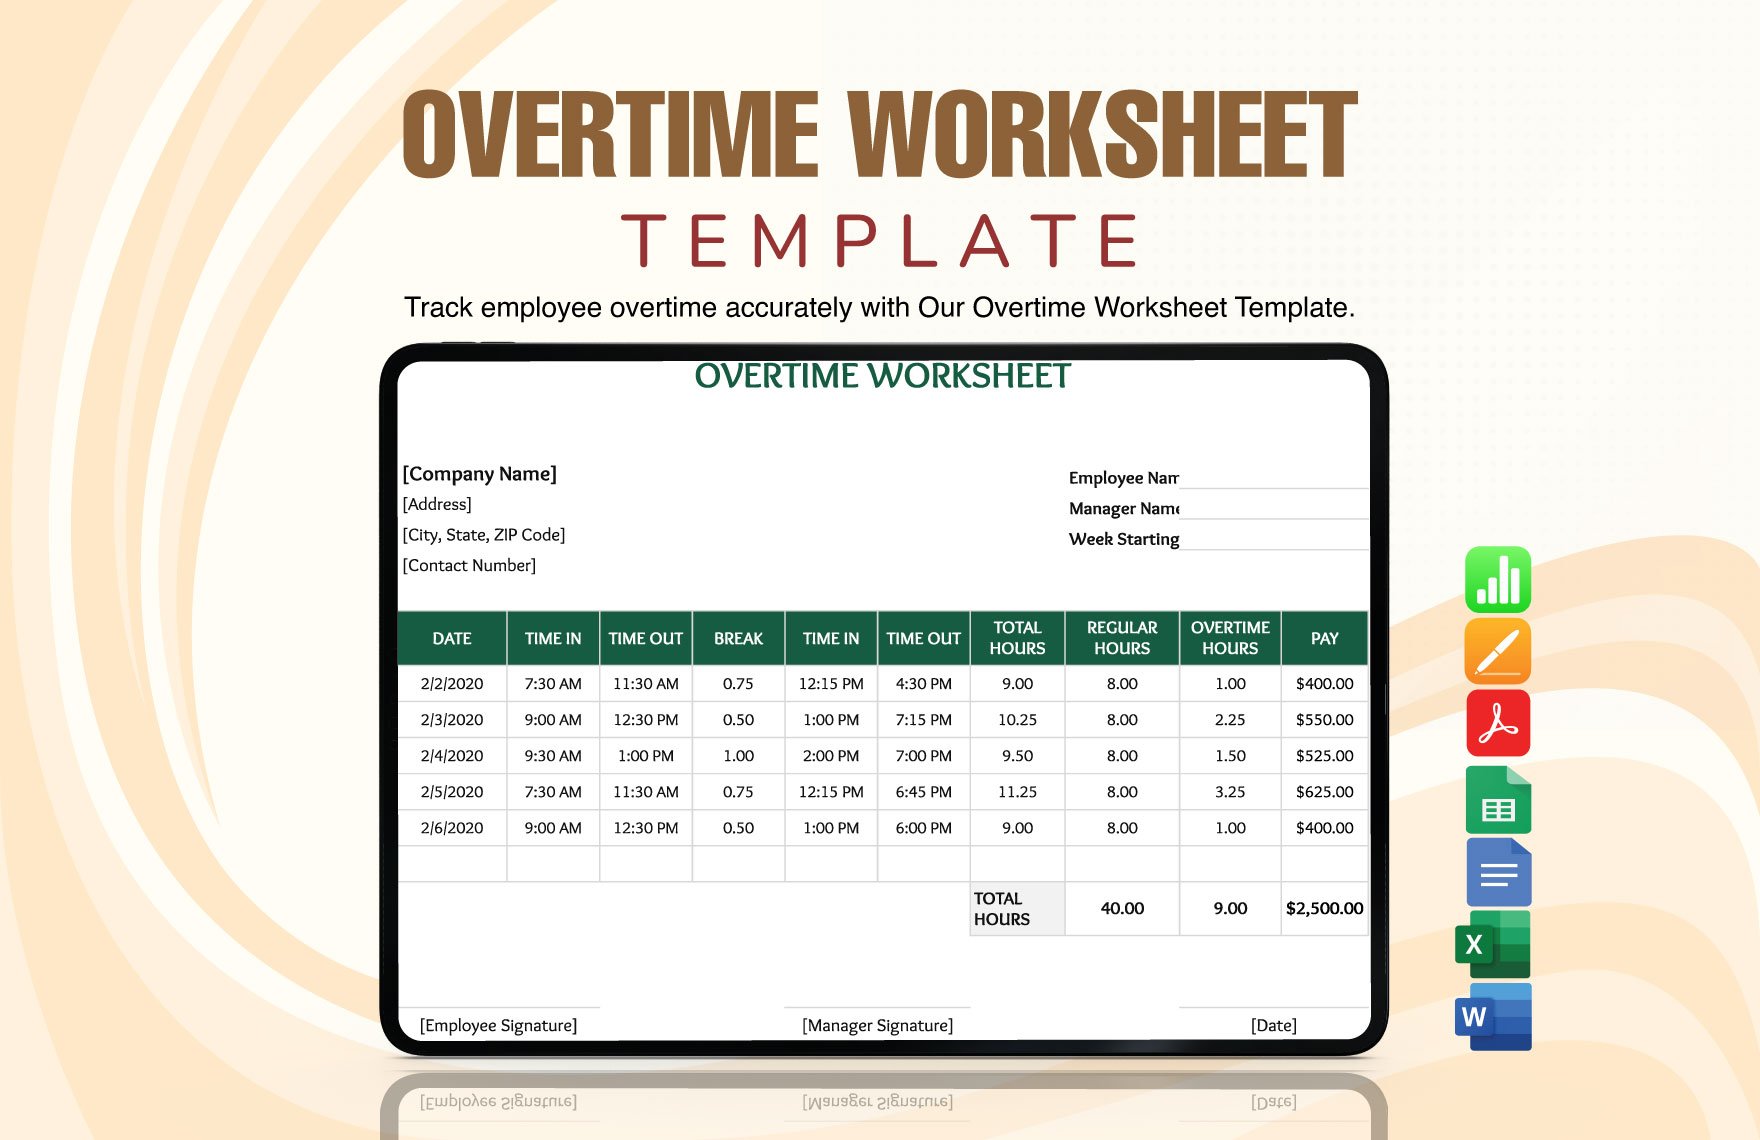 Free Overtime Worksheet Template in Word, Google Docs, Excel, PDF, Google Sheets, Apple Pages, Apple Numbers